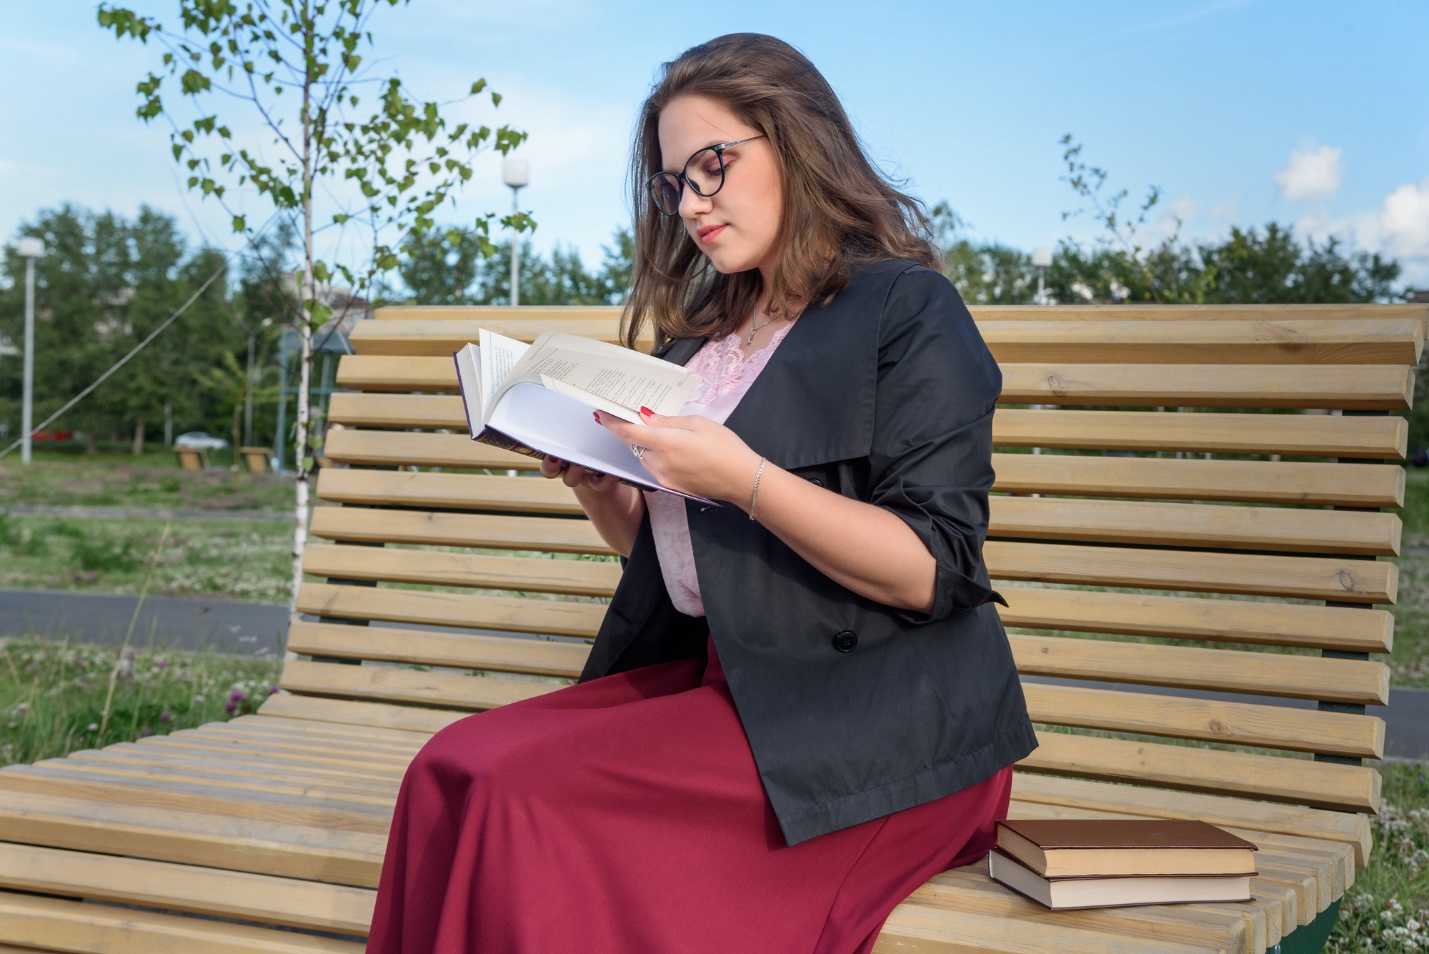 A person sitting on a bench reading a book

Description automatically generated